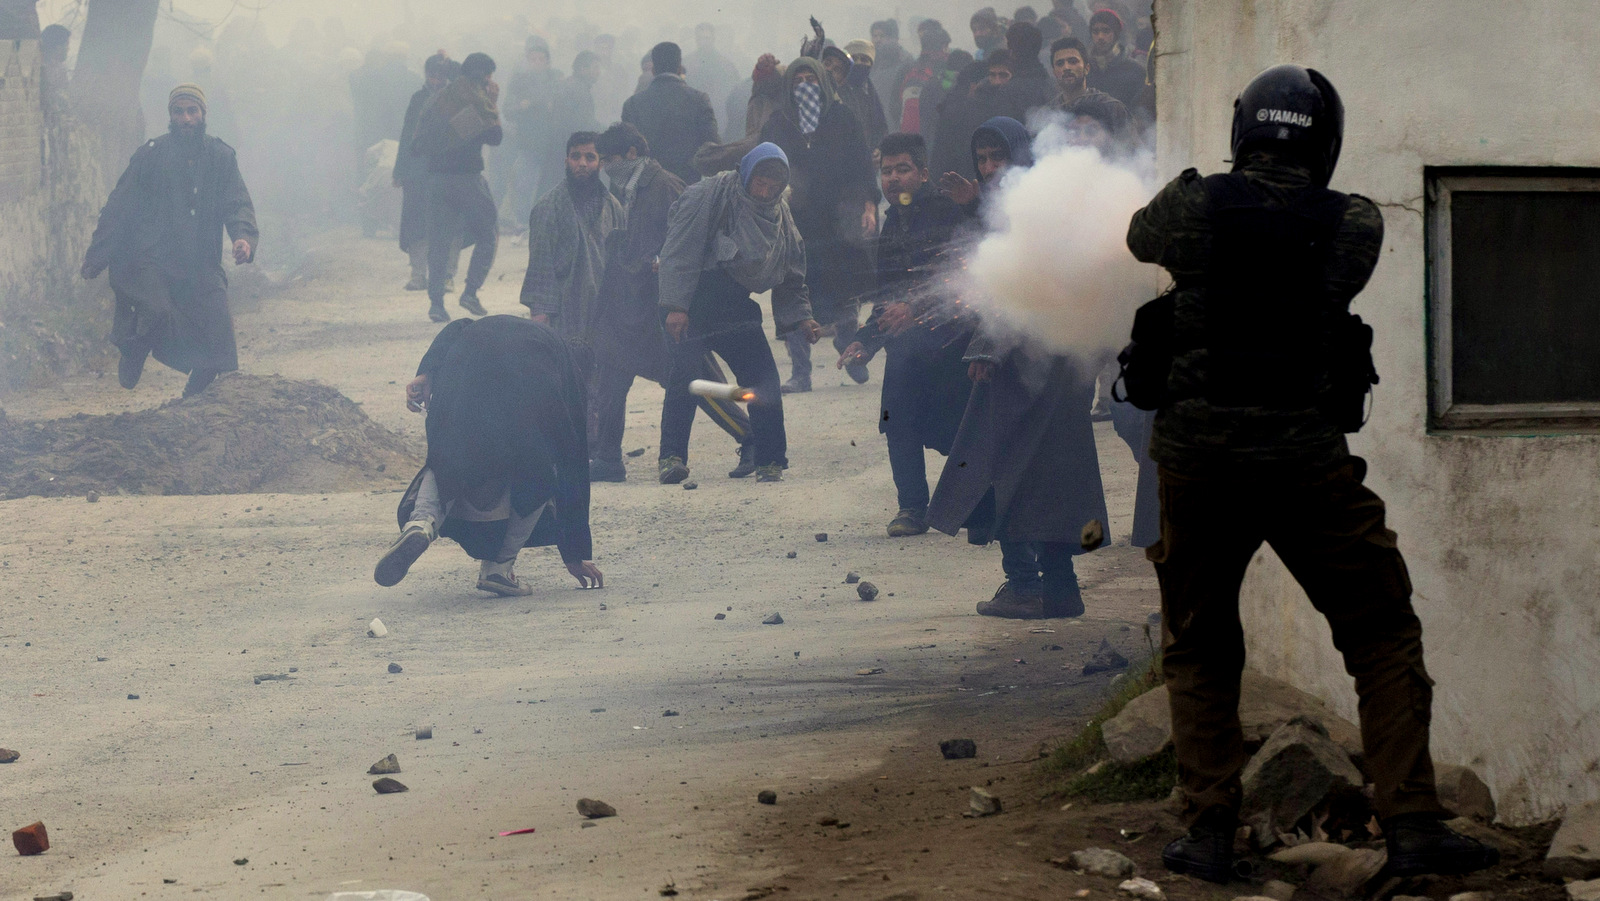 An Indian policeman fires a teargas shell as a Kashmiri Muslim, center, ducks to avoid it during the funeral procession of Sajad Ahmed Bhat, a top rebel commander on the outskirts of Srinagar, Indian controlled Kashmir, Tuesday, Jan. 12, 2016. Clashes erupted in Indian-controlled Kashmir Tuesday as police fired tear gas to stop a march by thousands of people participating in a funeral procession of a local militant killed in a gunfight with government forces. (AP Photo/Dar Yasin)